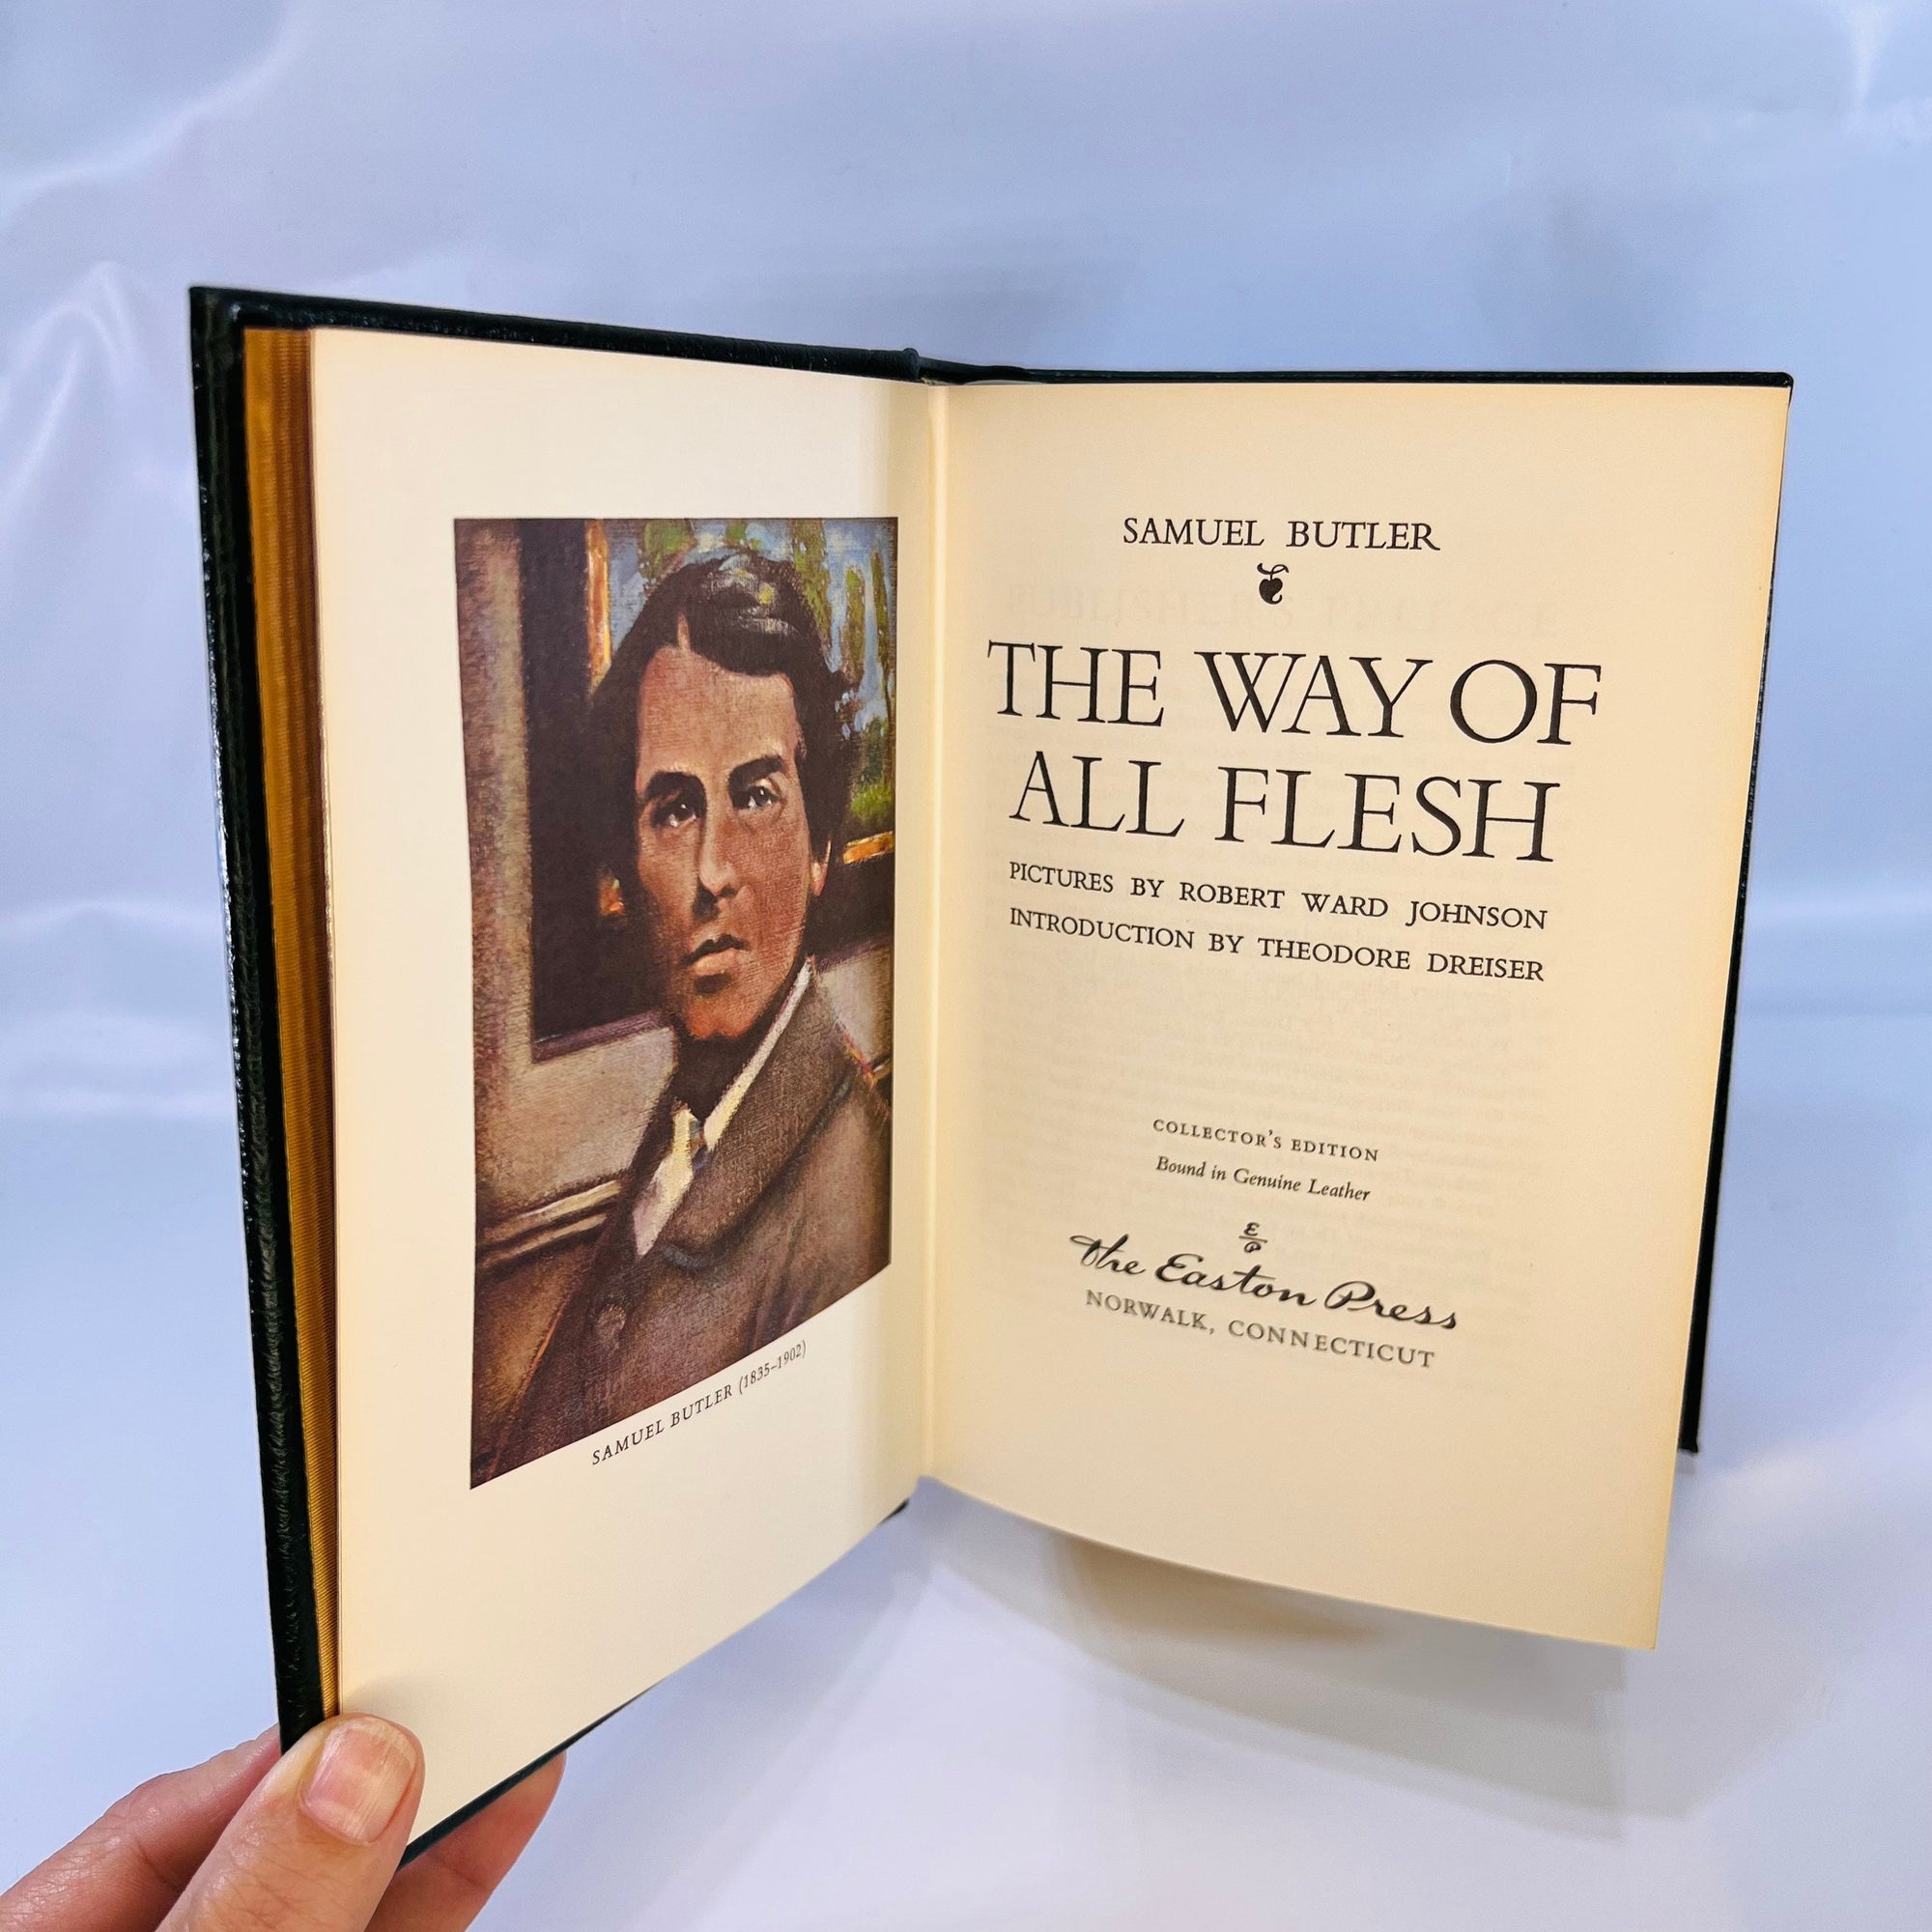 The Way of All Flesh by Samuel Butler 1980 Vintage Classic Easton Press of the 100 Greatest Books Ever Written Collection Leather Bound Book